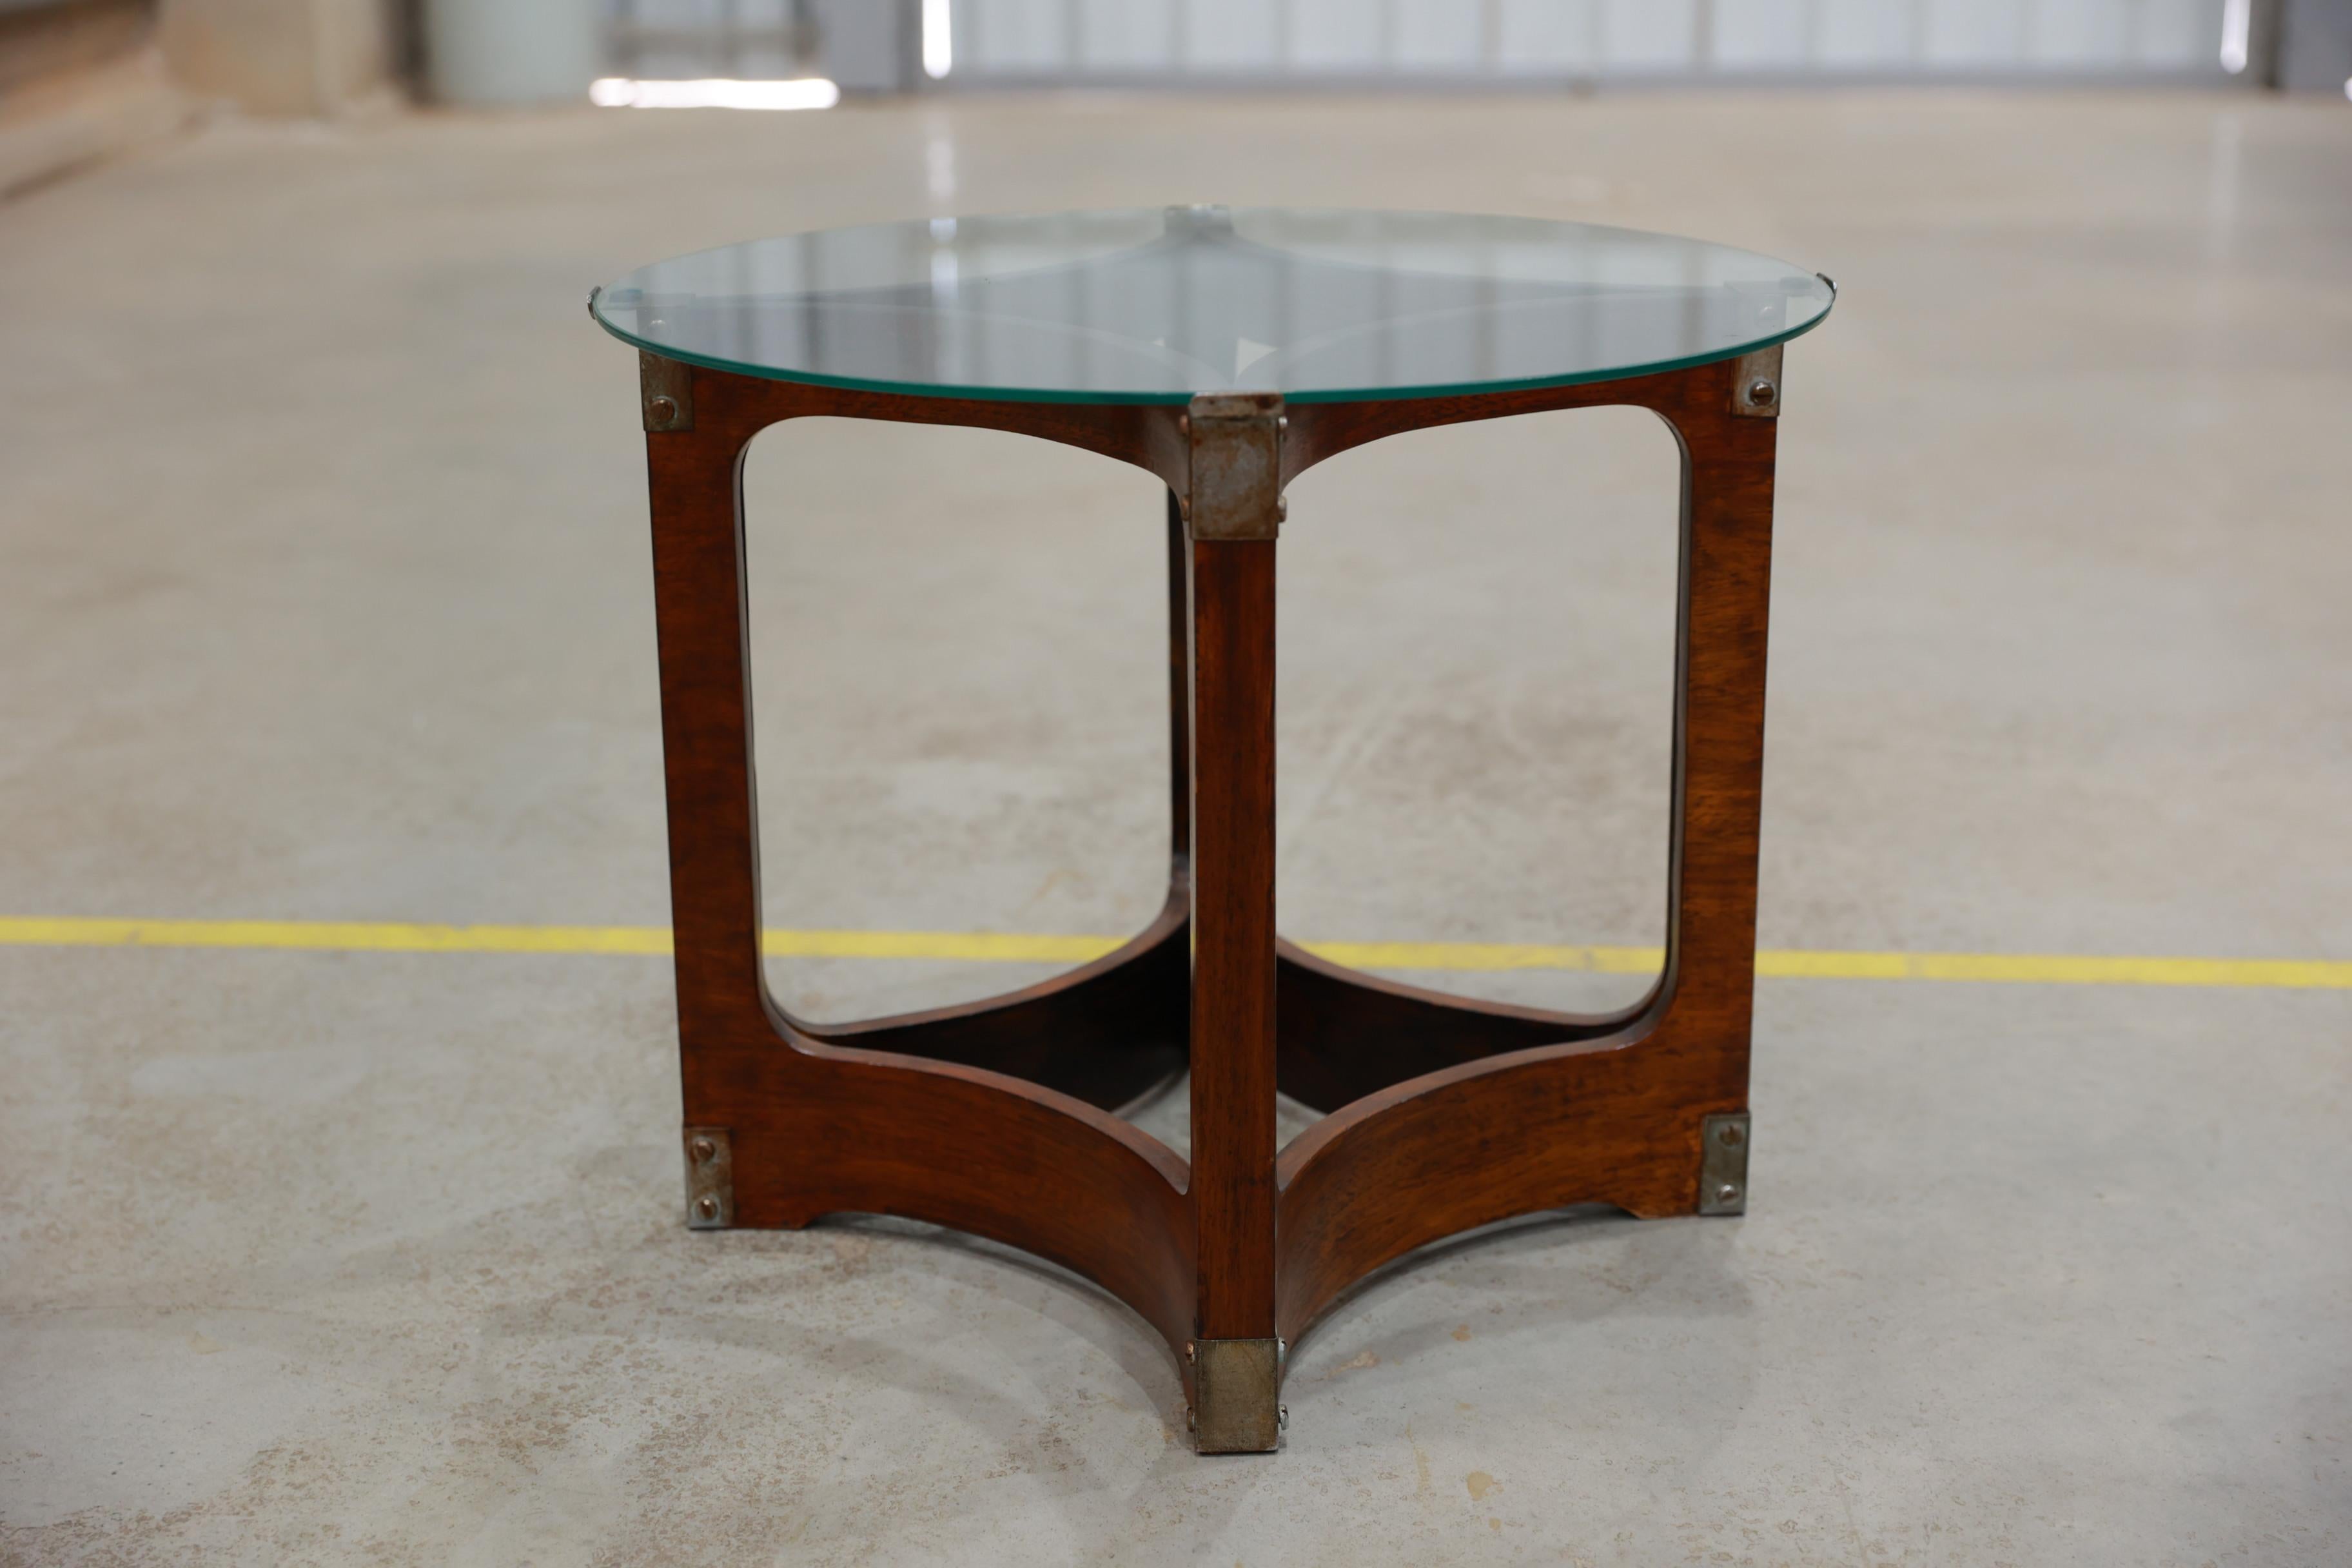 Brazilian Mid-Century Modern Side Table in Bentwood & Glass by Novo Rumo, 1960s, Brazil For Sale